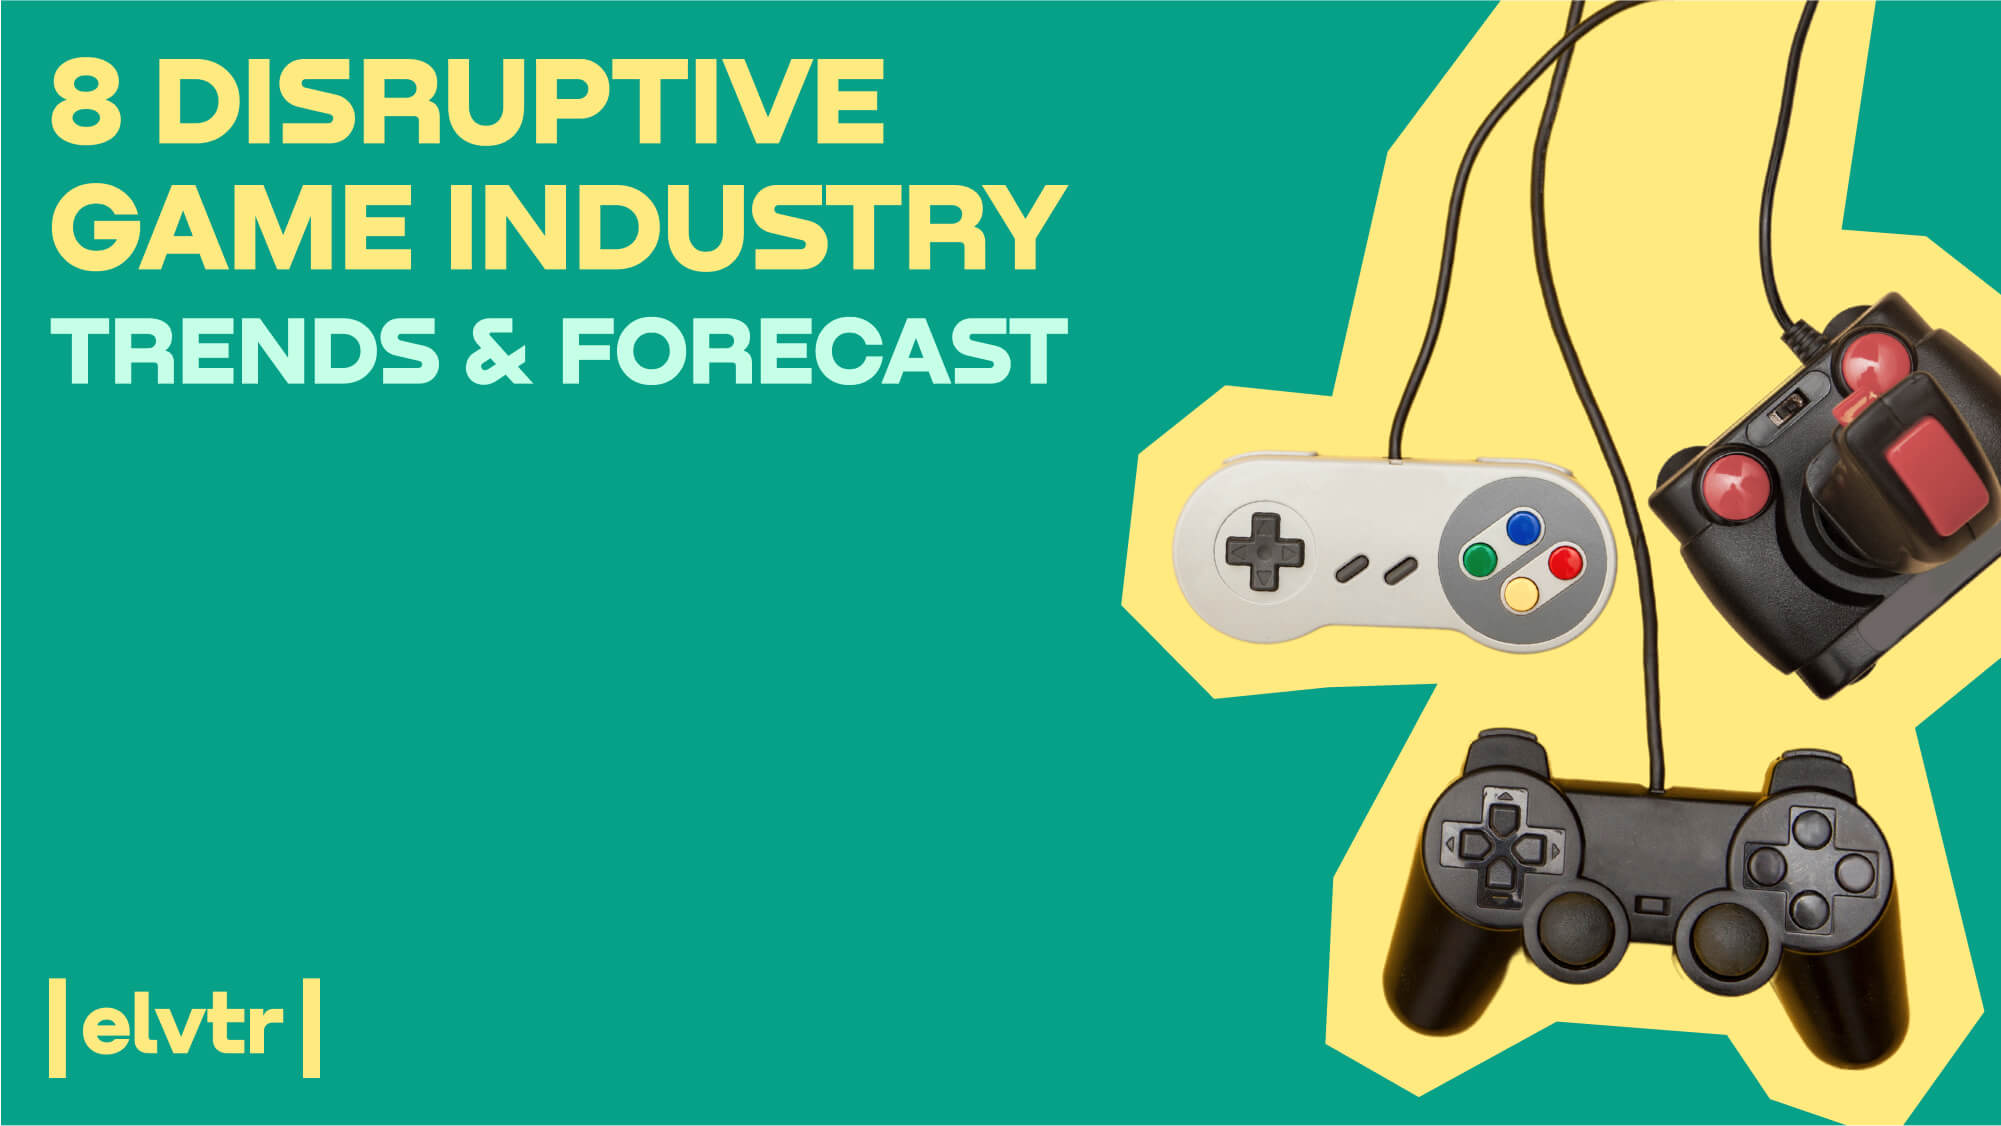 8 DISRUPTIVE GAME INDUSTRY TRENDS & FORECAST image